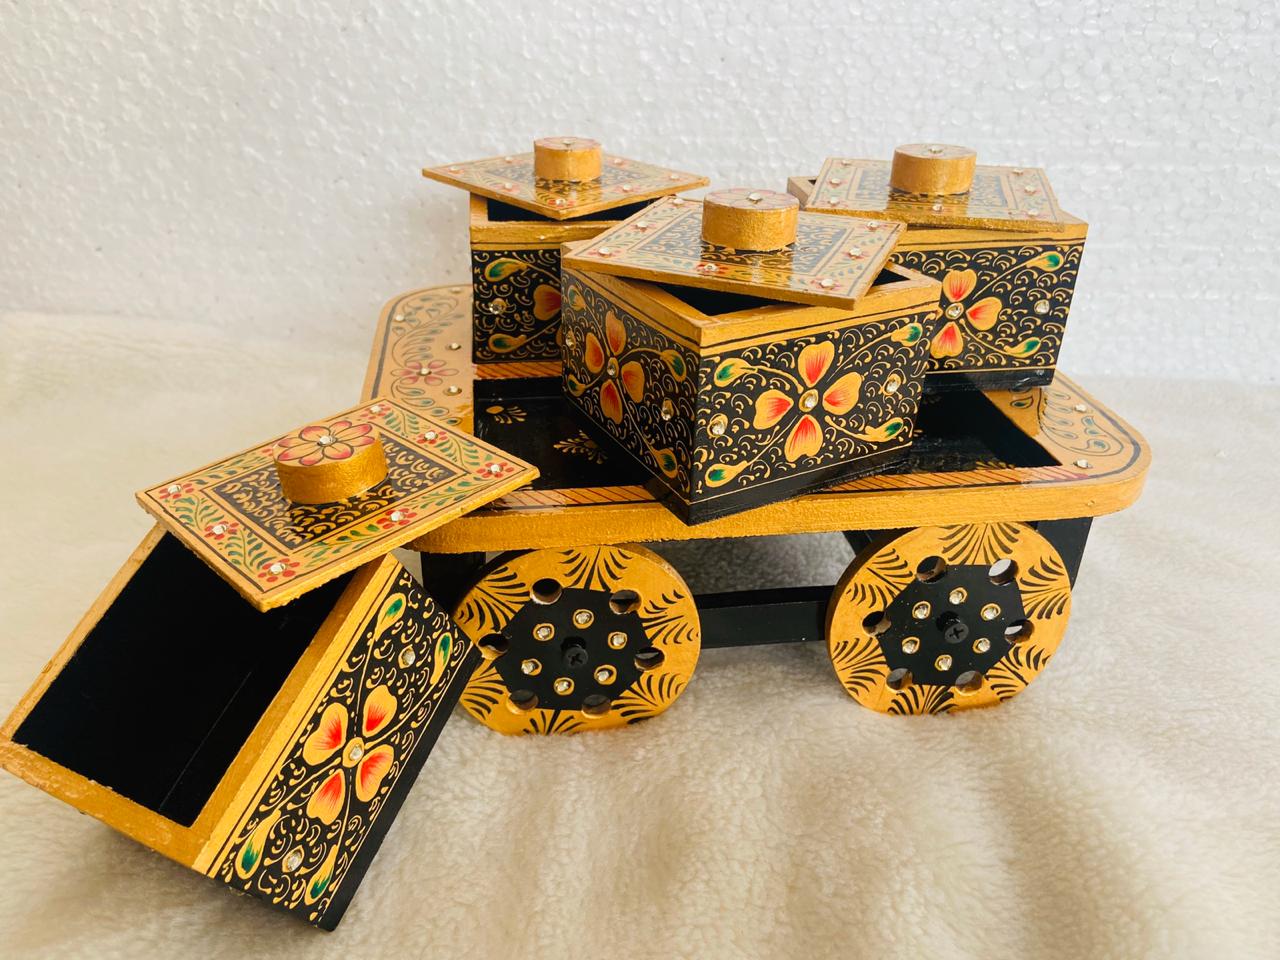 LAMANSH Assorted coloura / Wood / 1 LAMANSH® Wooden Handcrafted Hand Painted Rectangular Dry Fruit Box With 4 Compartment & Storage Trolley Box Showpiece